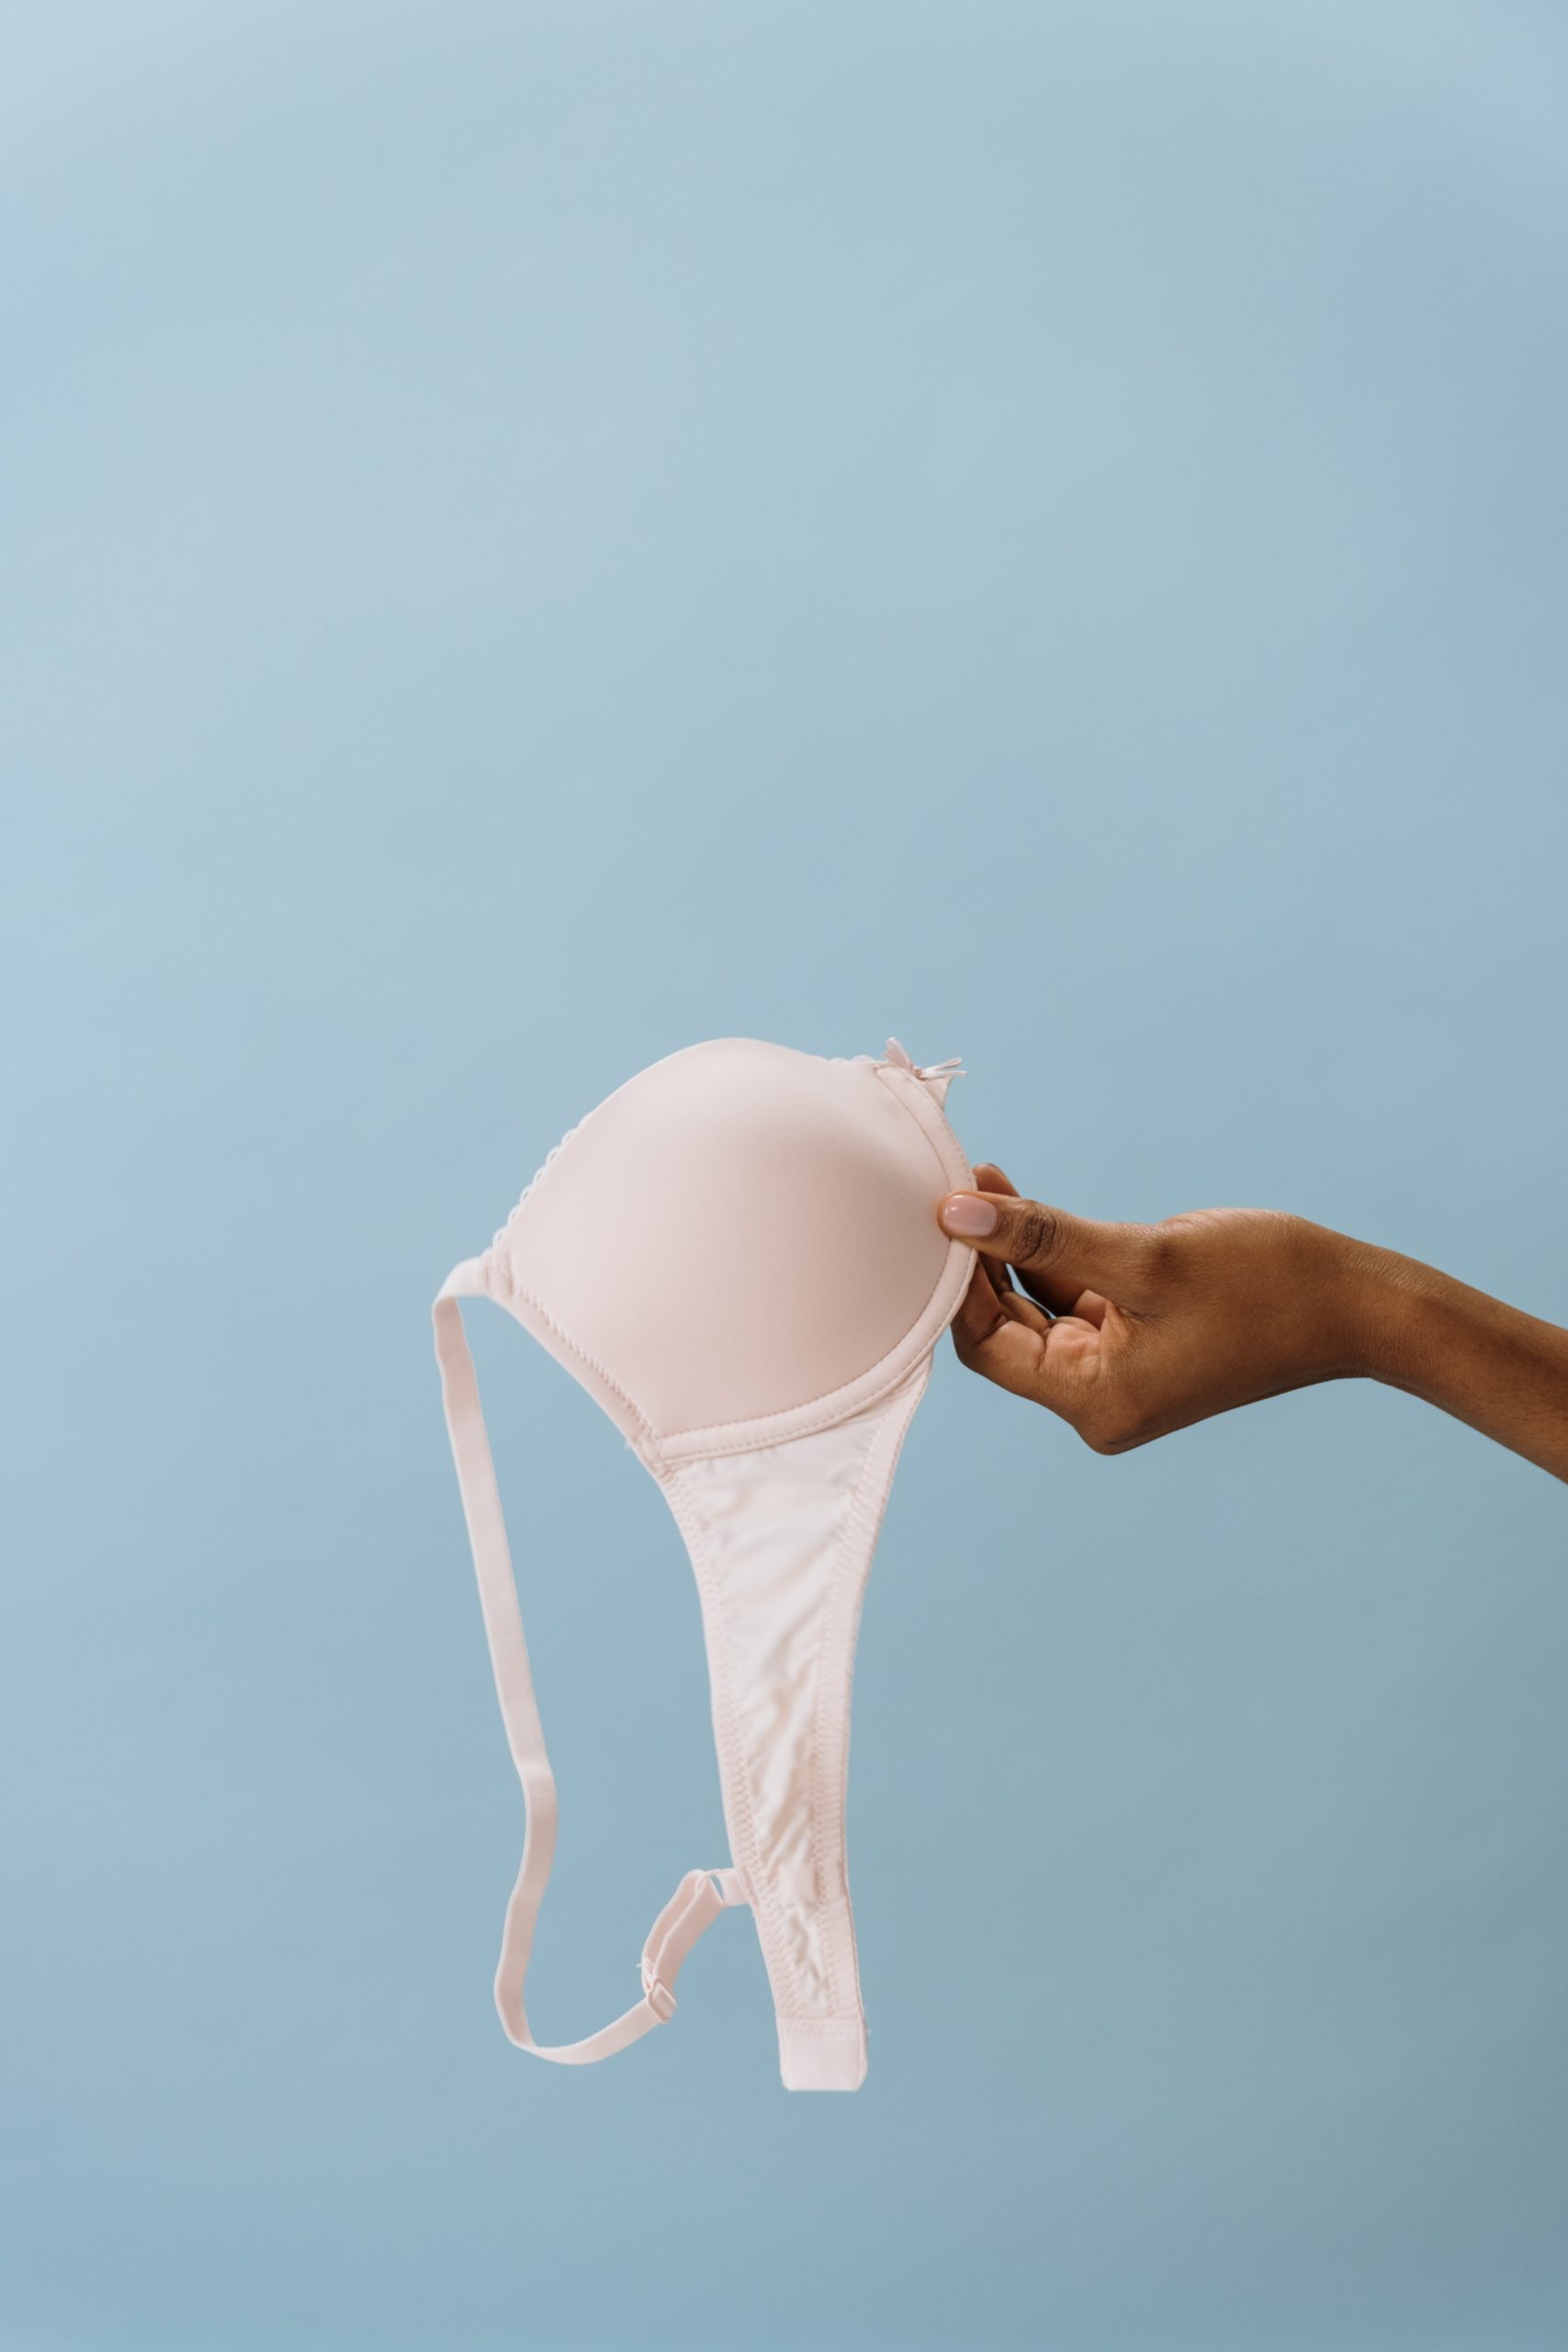 The Bra Recycling Programs That You Need to Know About